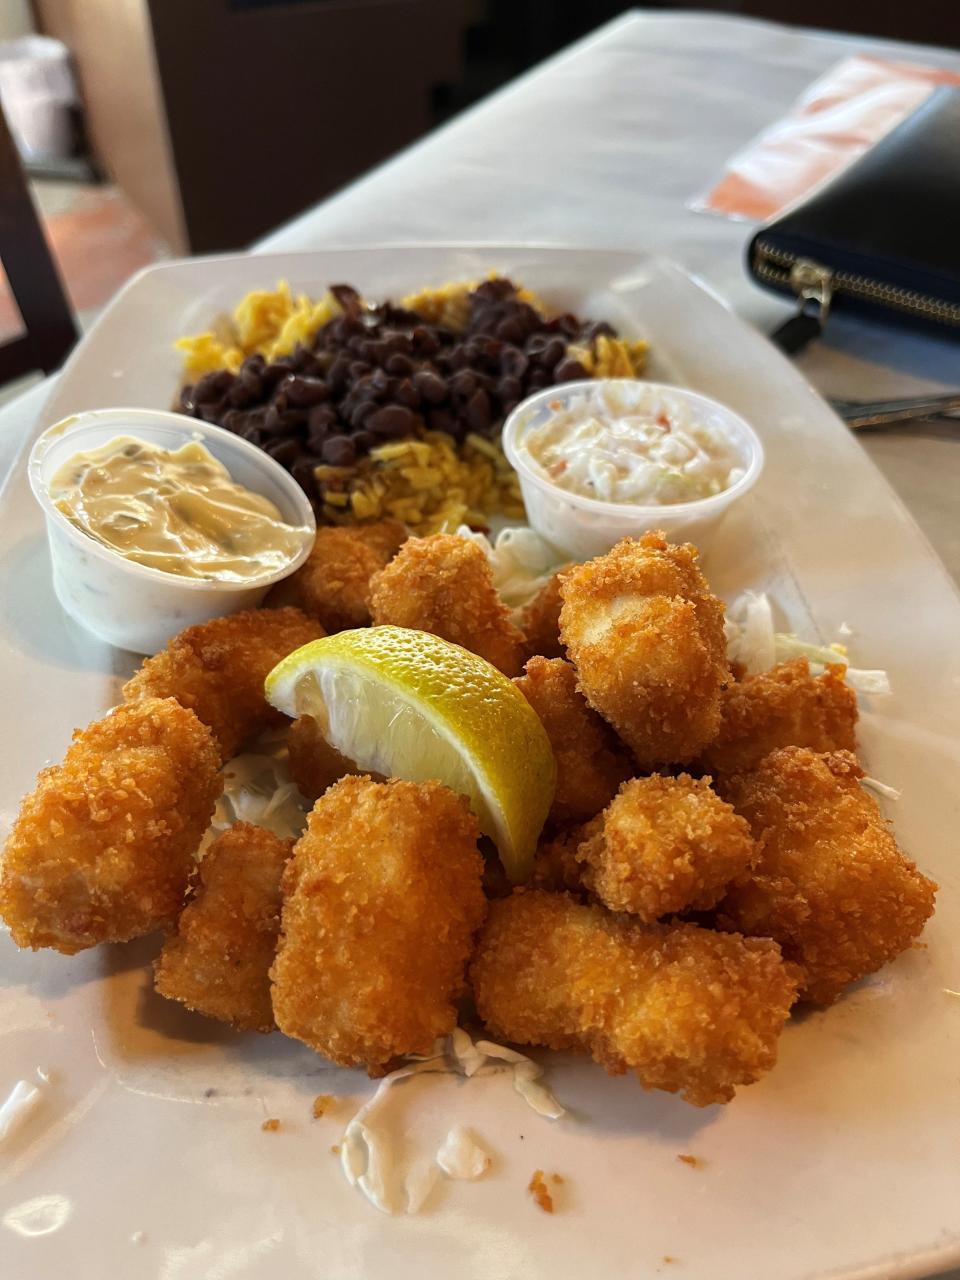 The menu is what we have come to love and expect from Blue Dog with plenty of fresh seafood offerings, including these Mahi bites.